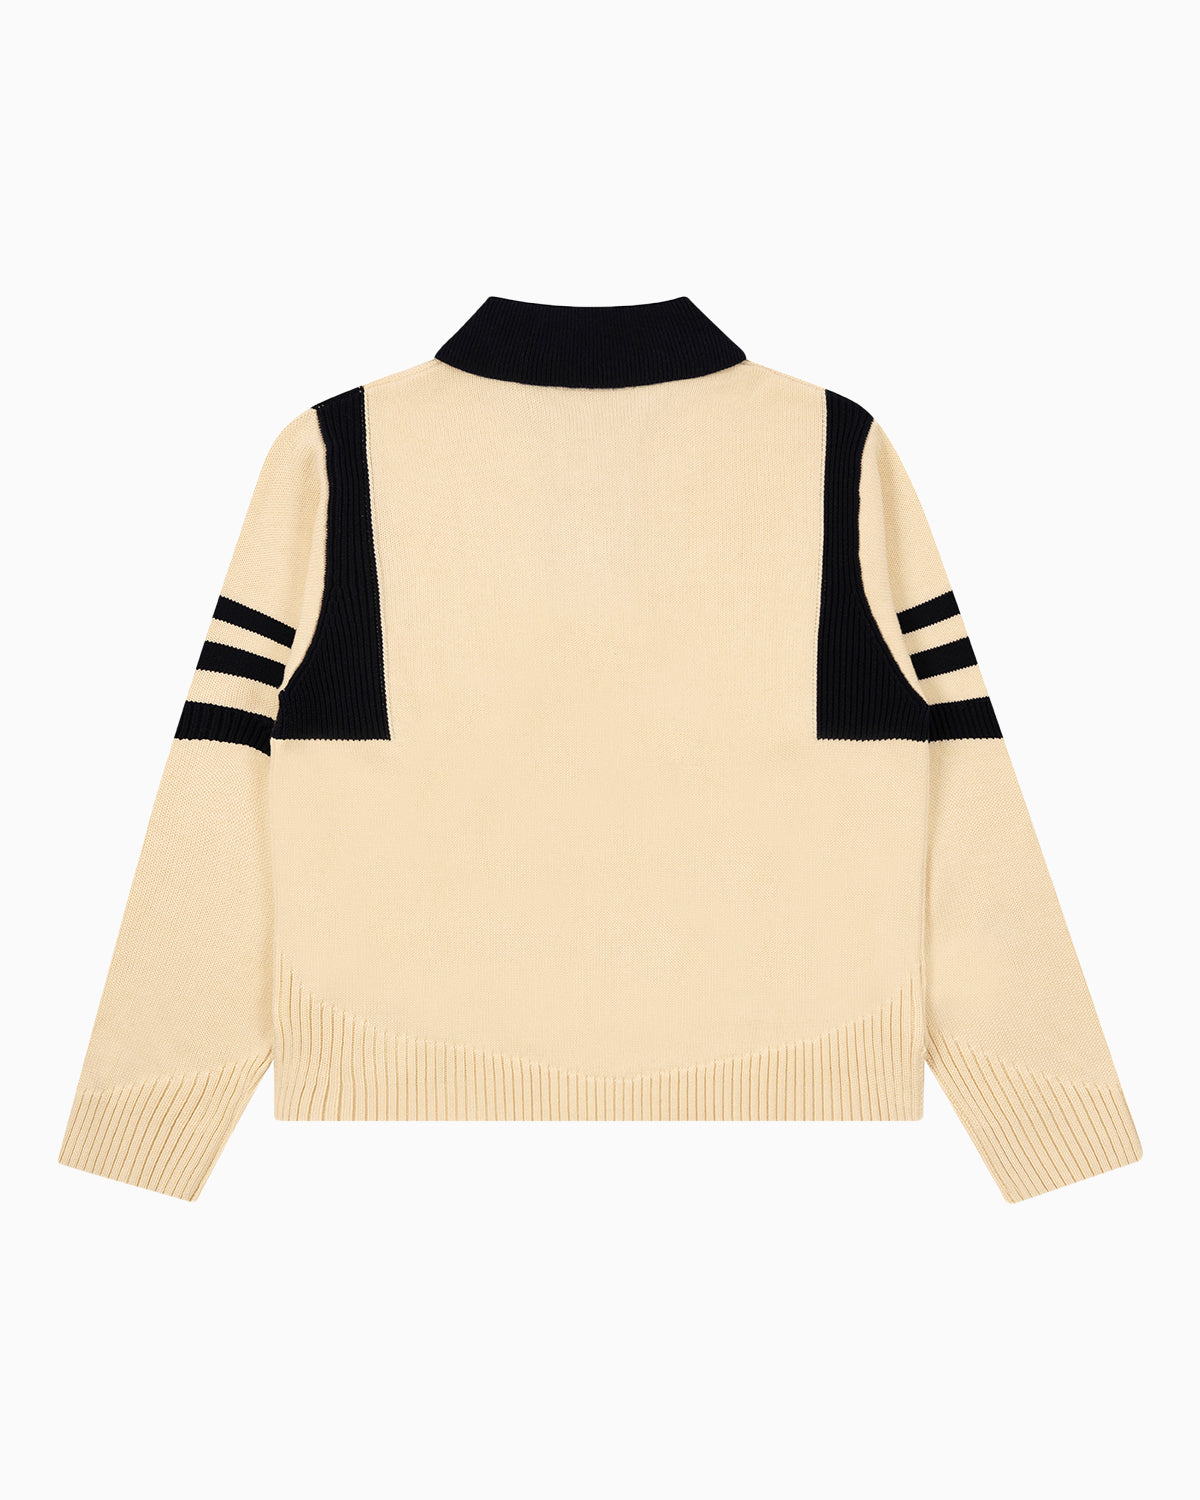 BackView of Kai Rugby Knit Sweater in Cream and Navy Blue by Aseye Studio